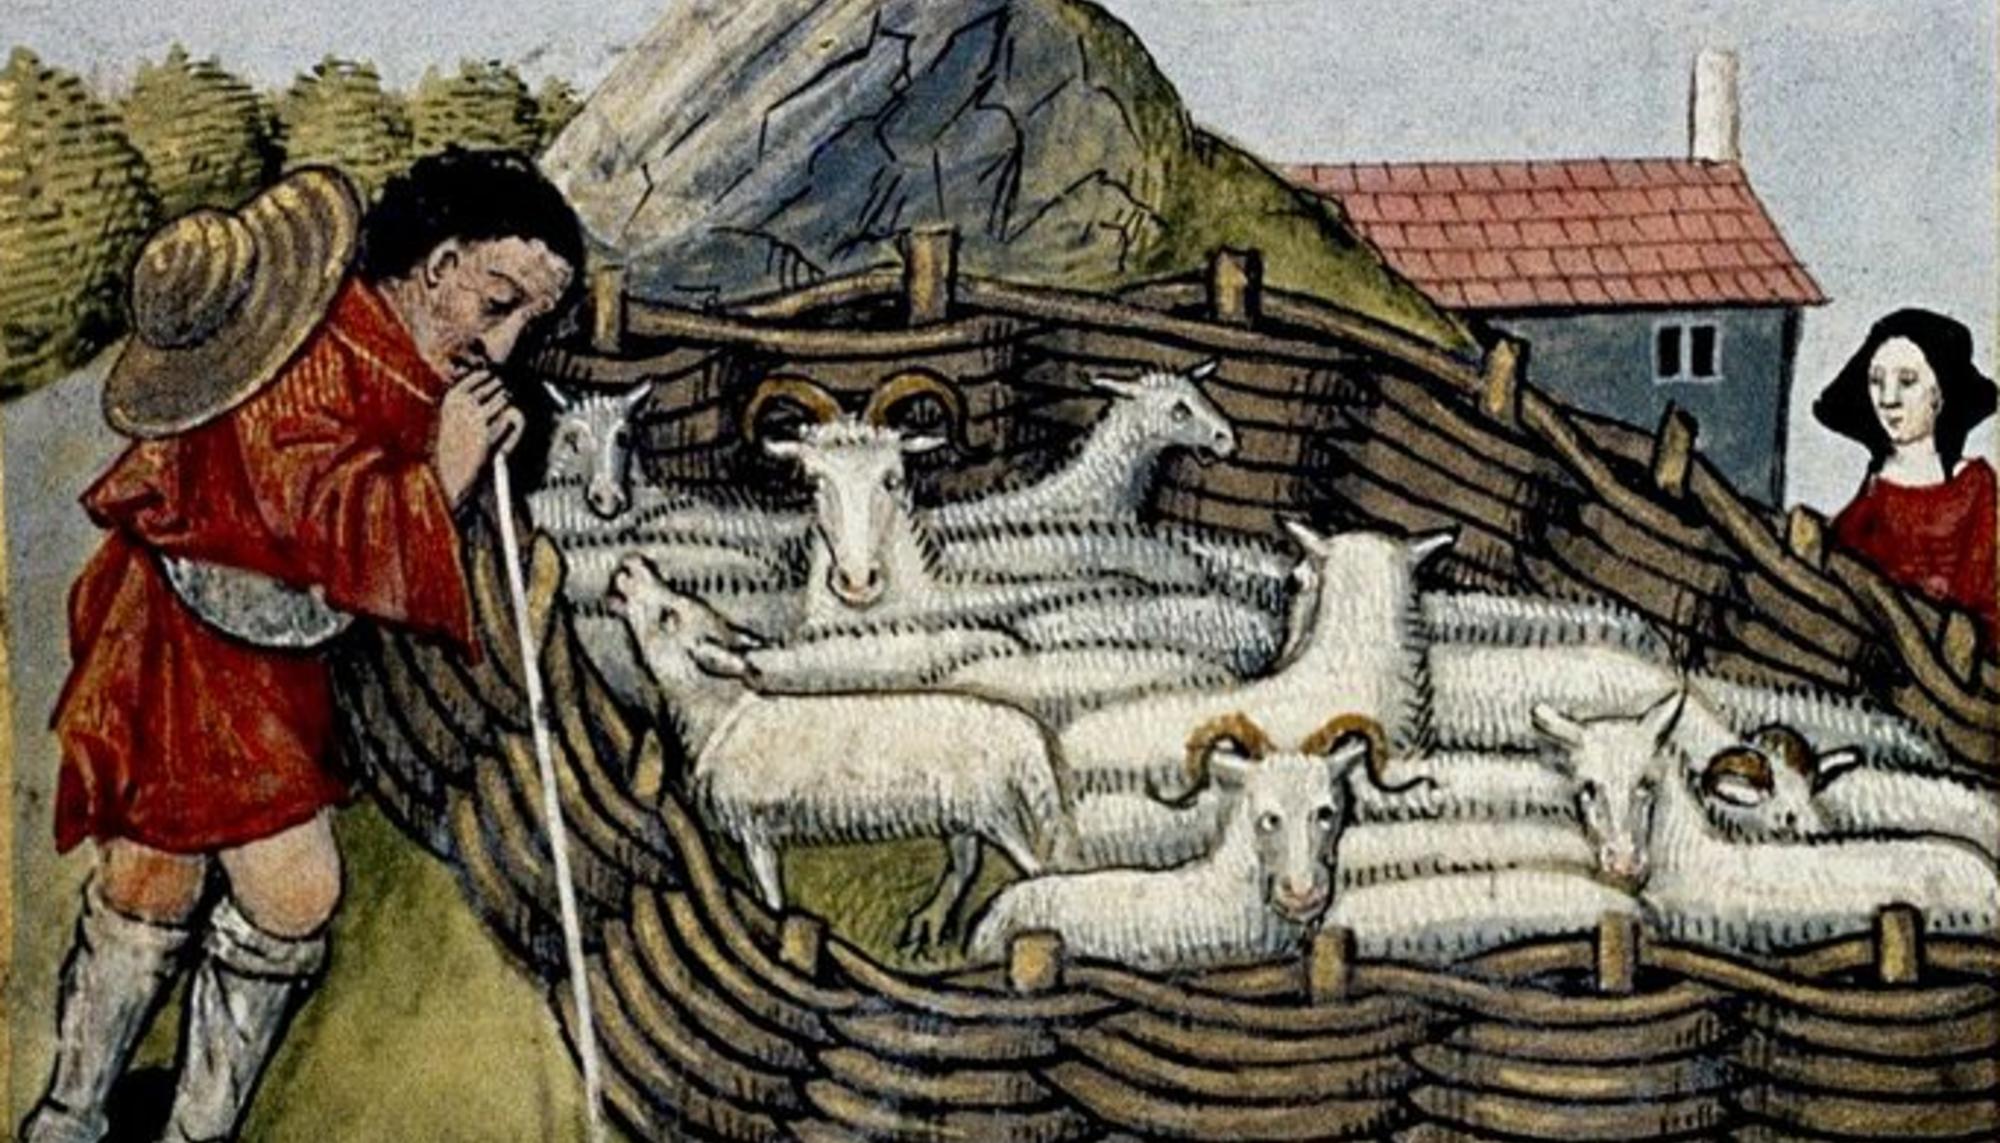 Print of sheep in woven hurdle pen. Medieval France. 15th century.